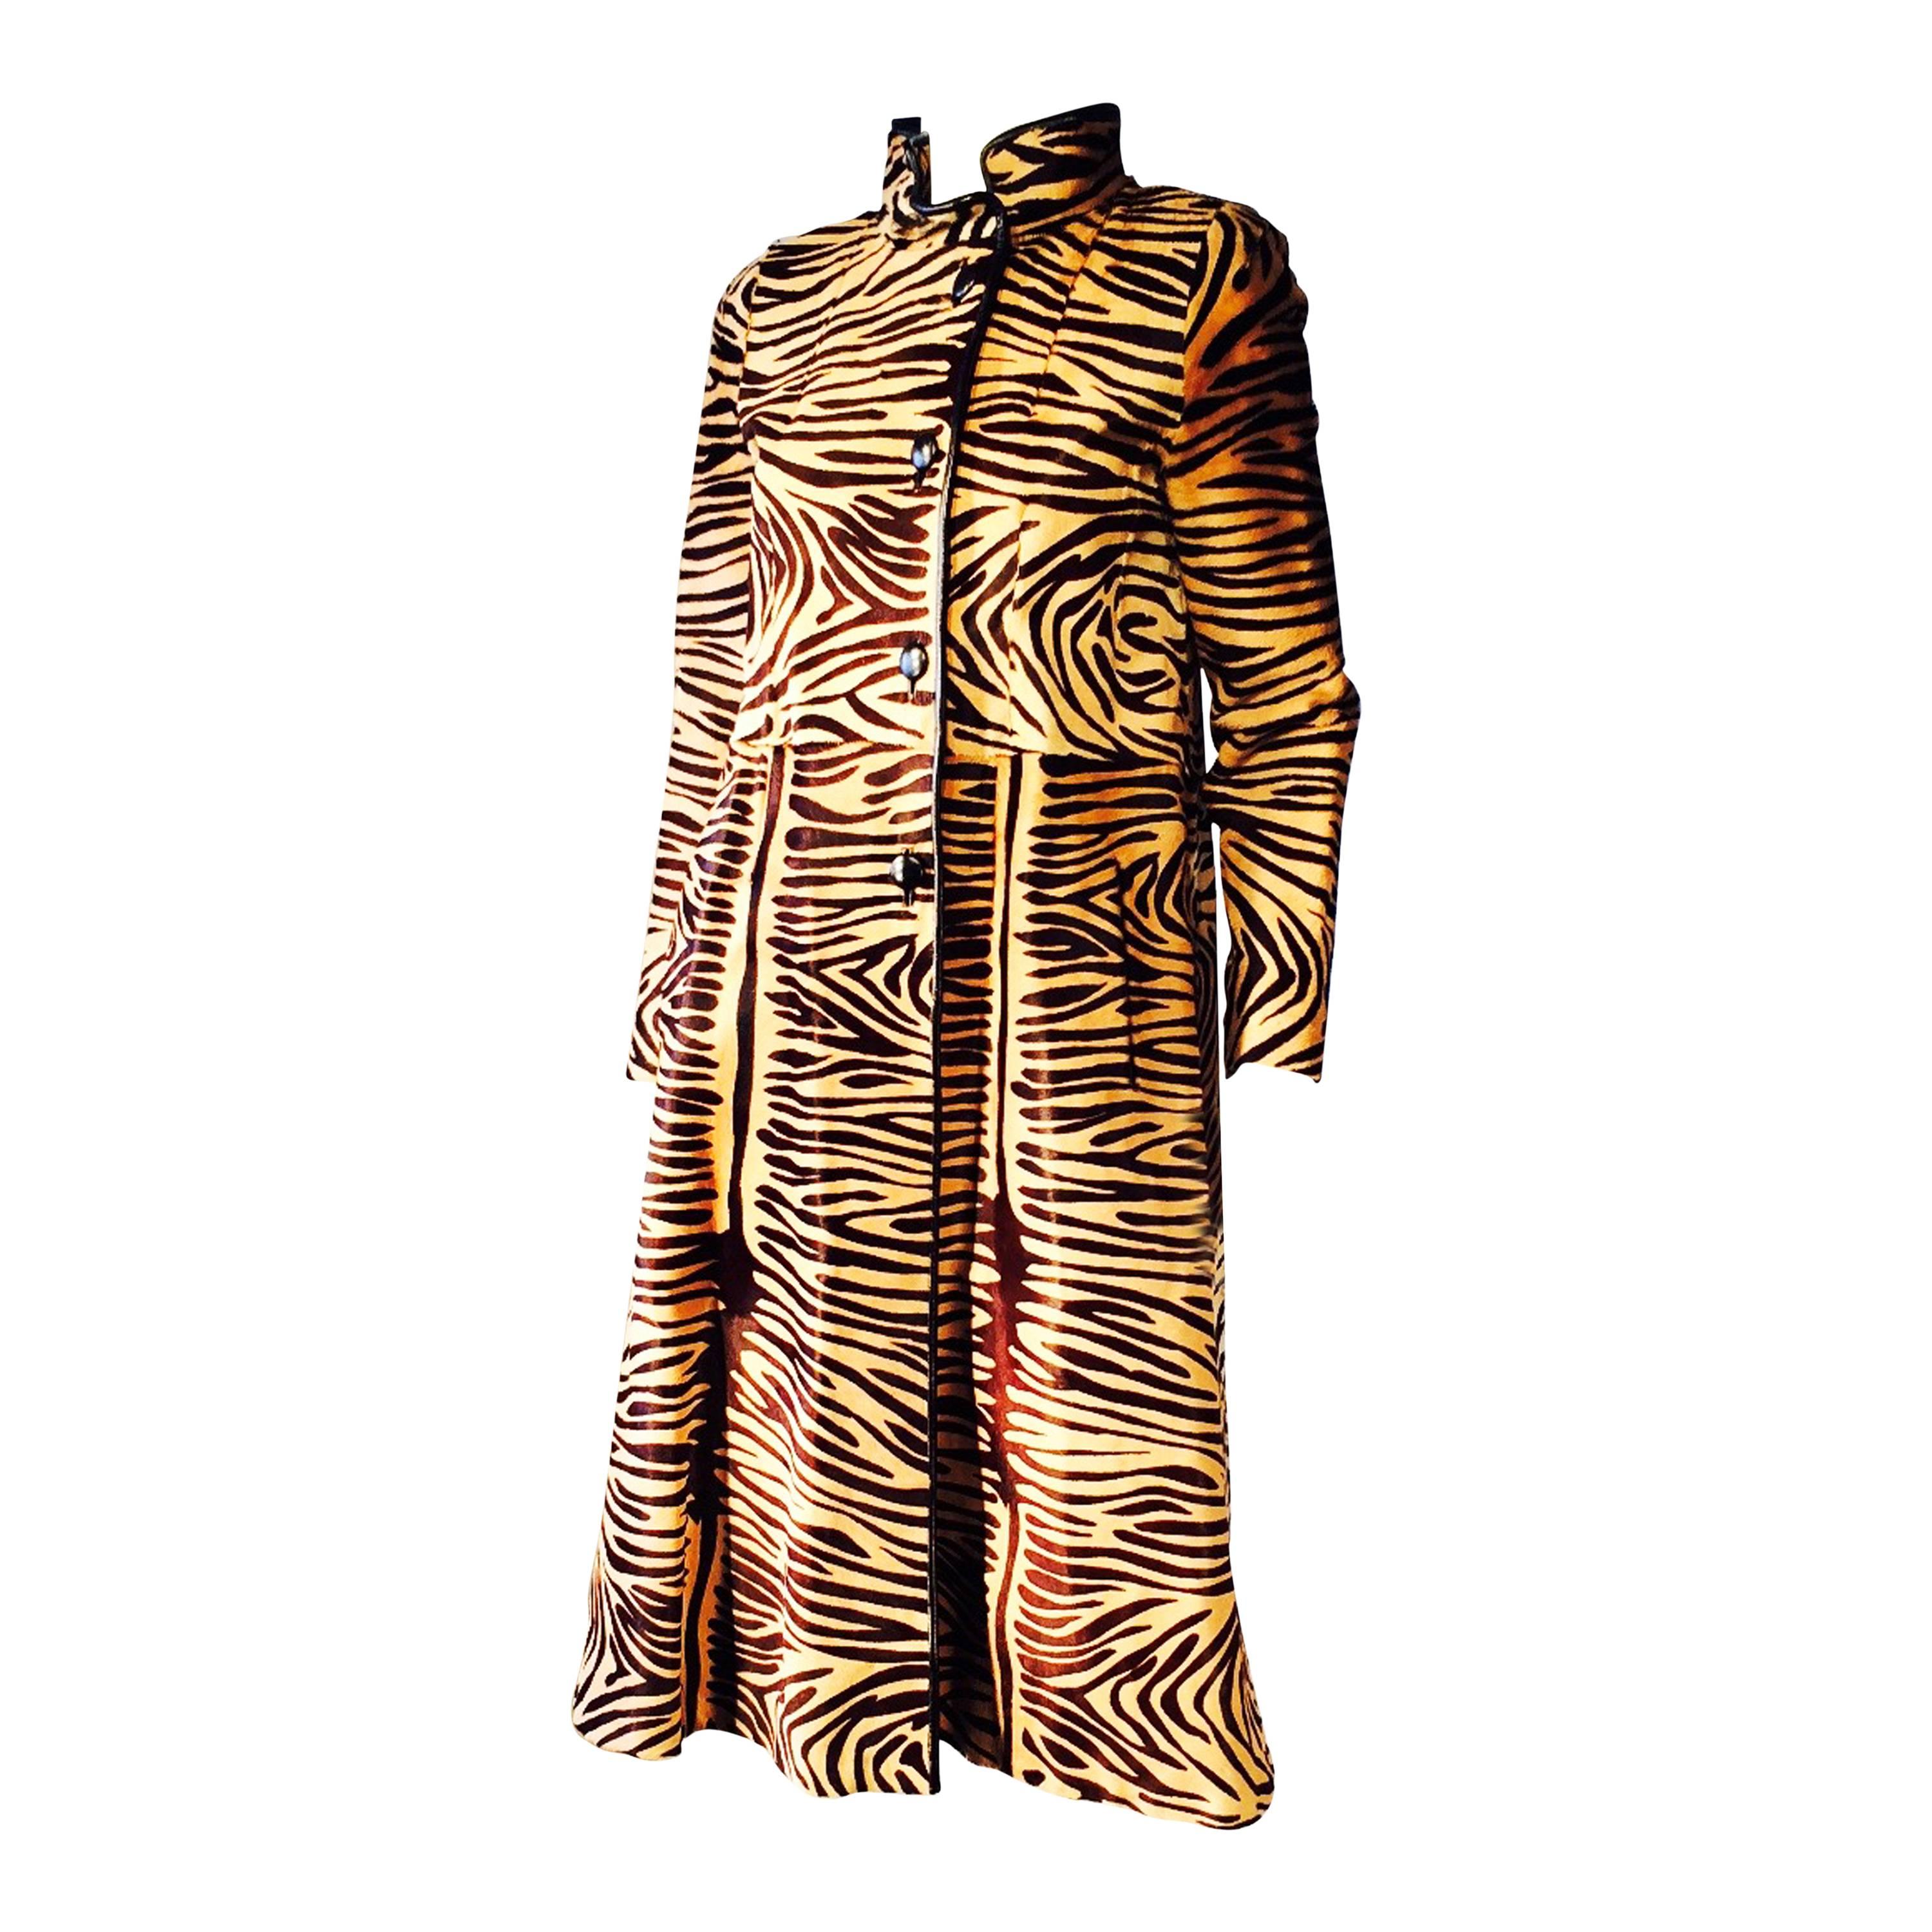 Rare Christian Dior Couture Tiger Stencil Pony Hair Coat 1950s For Sale